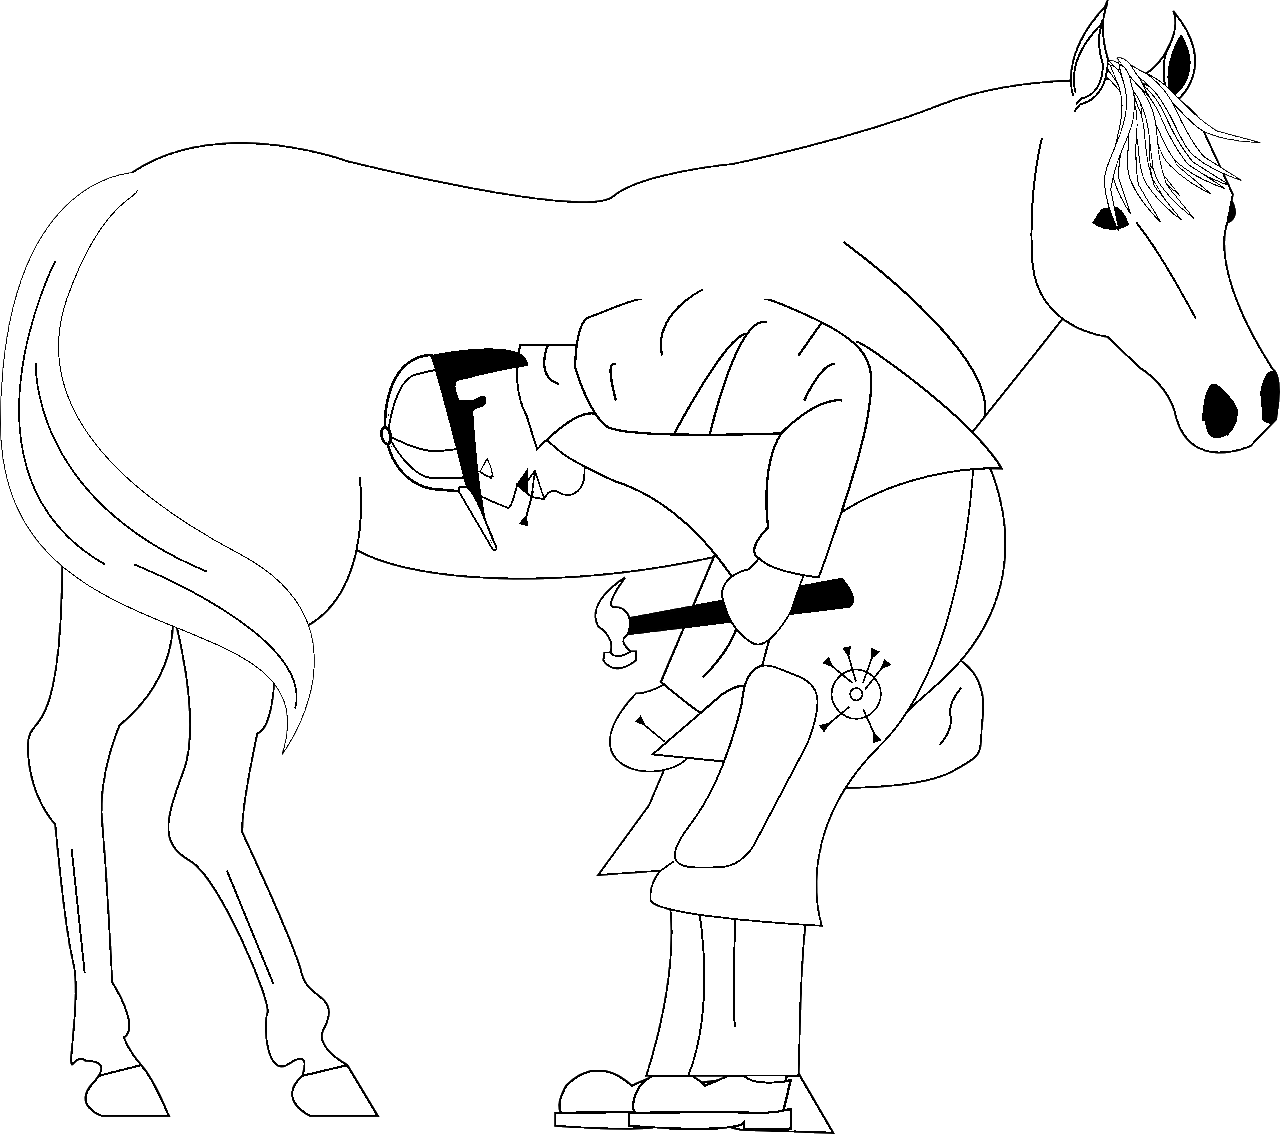 Coloring page of horse and blacksmith